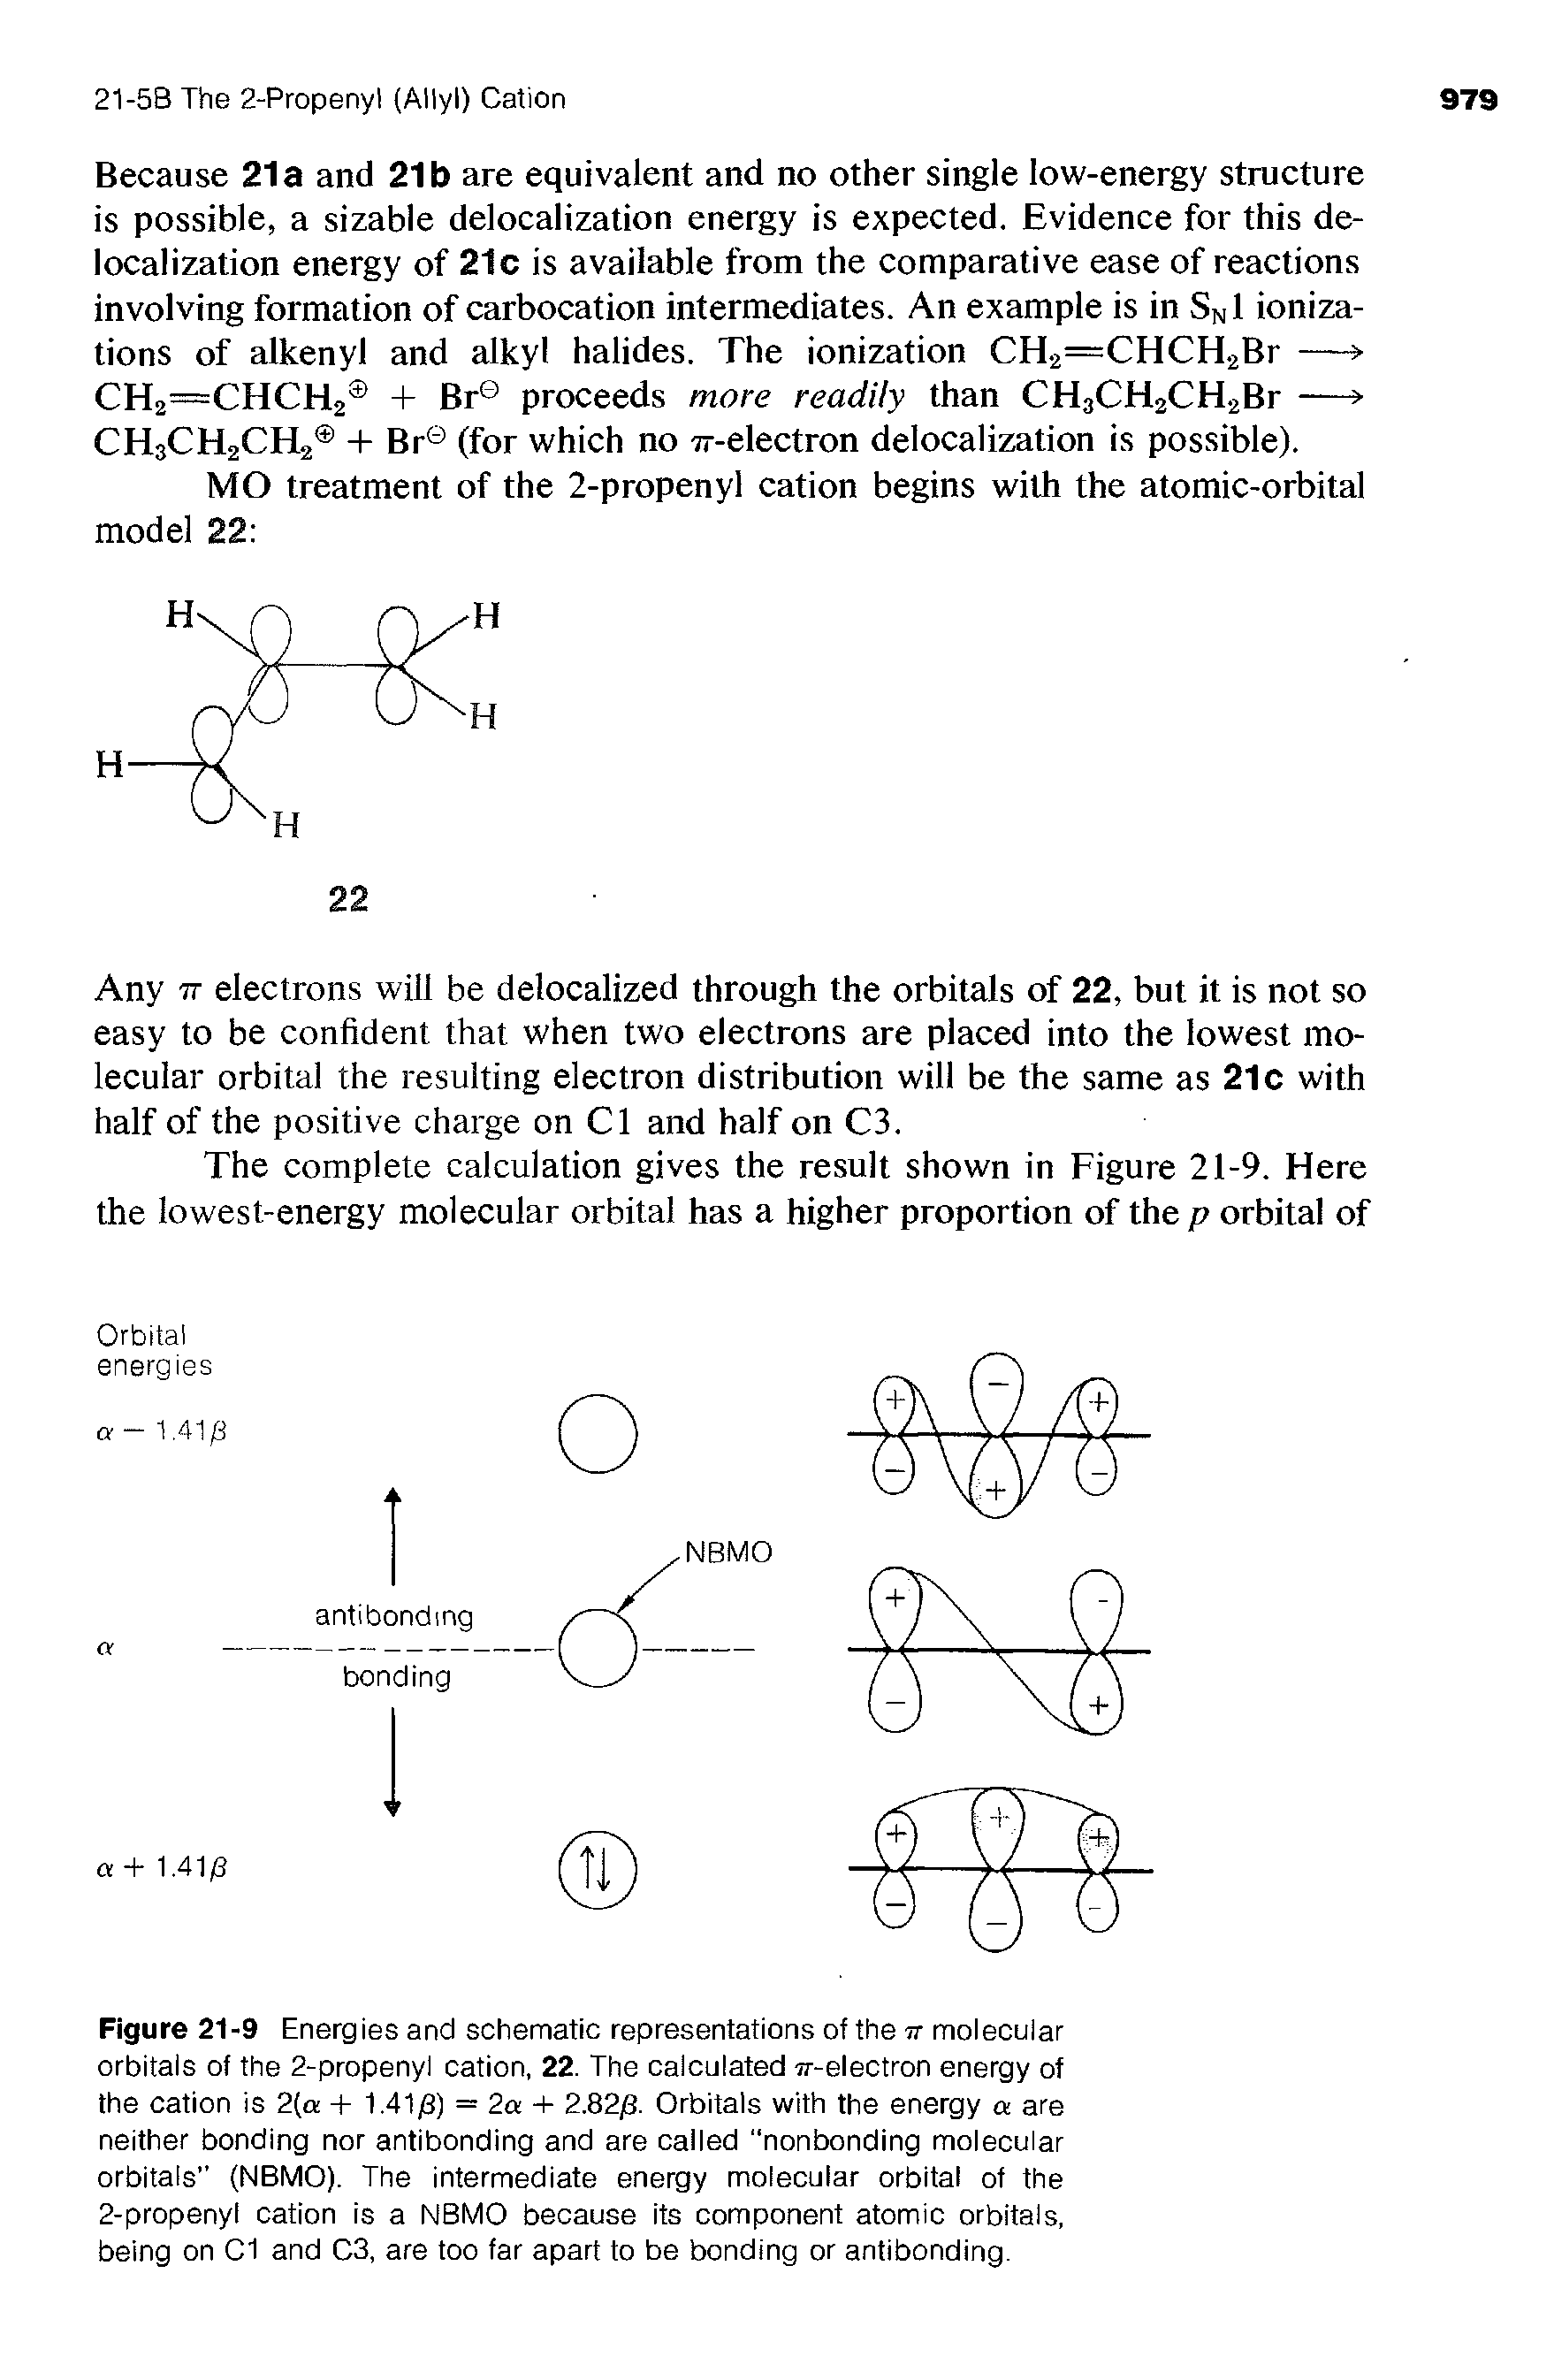 Figure 21-9 Energies and schematic representations of the it molecular orbitals of the 2-propenyl cation, 22. The calculated jr-electron energy of the cation is 2 a + 1.41/3) = 2a + 2.82/3. Orbitals with the energy a are neither bonding nor antibonding and are called nonbonding molecular orbitals (NBMO). The intermediate energy molecular orbital of the 2-propenyl cation is a NBMO because its component atomic orbitals, being on C1 and C3, are too far apart to be bonding or antibonding.